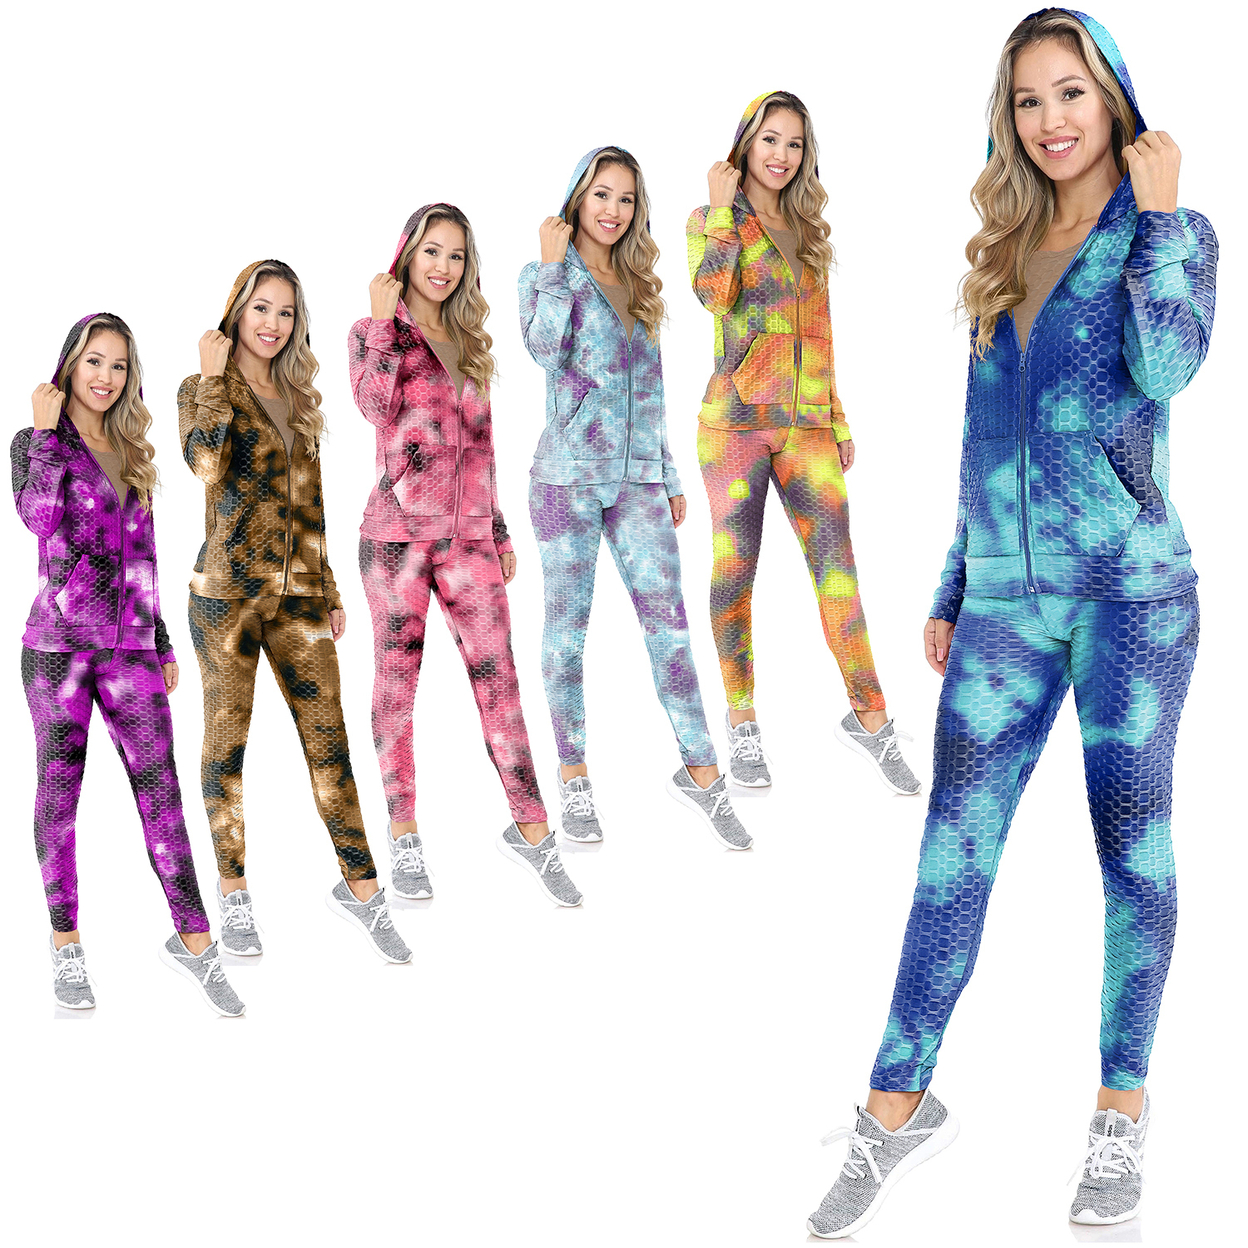 2-Piece: Women's Athletic Anti-Cellulite Textured Tie Dye Body Contour Yoga Track Suit W/ Hood - Small, Solid